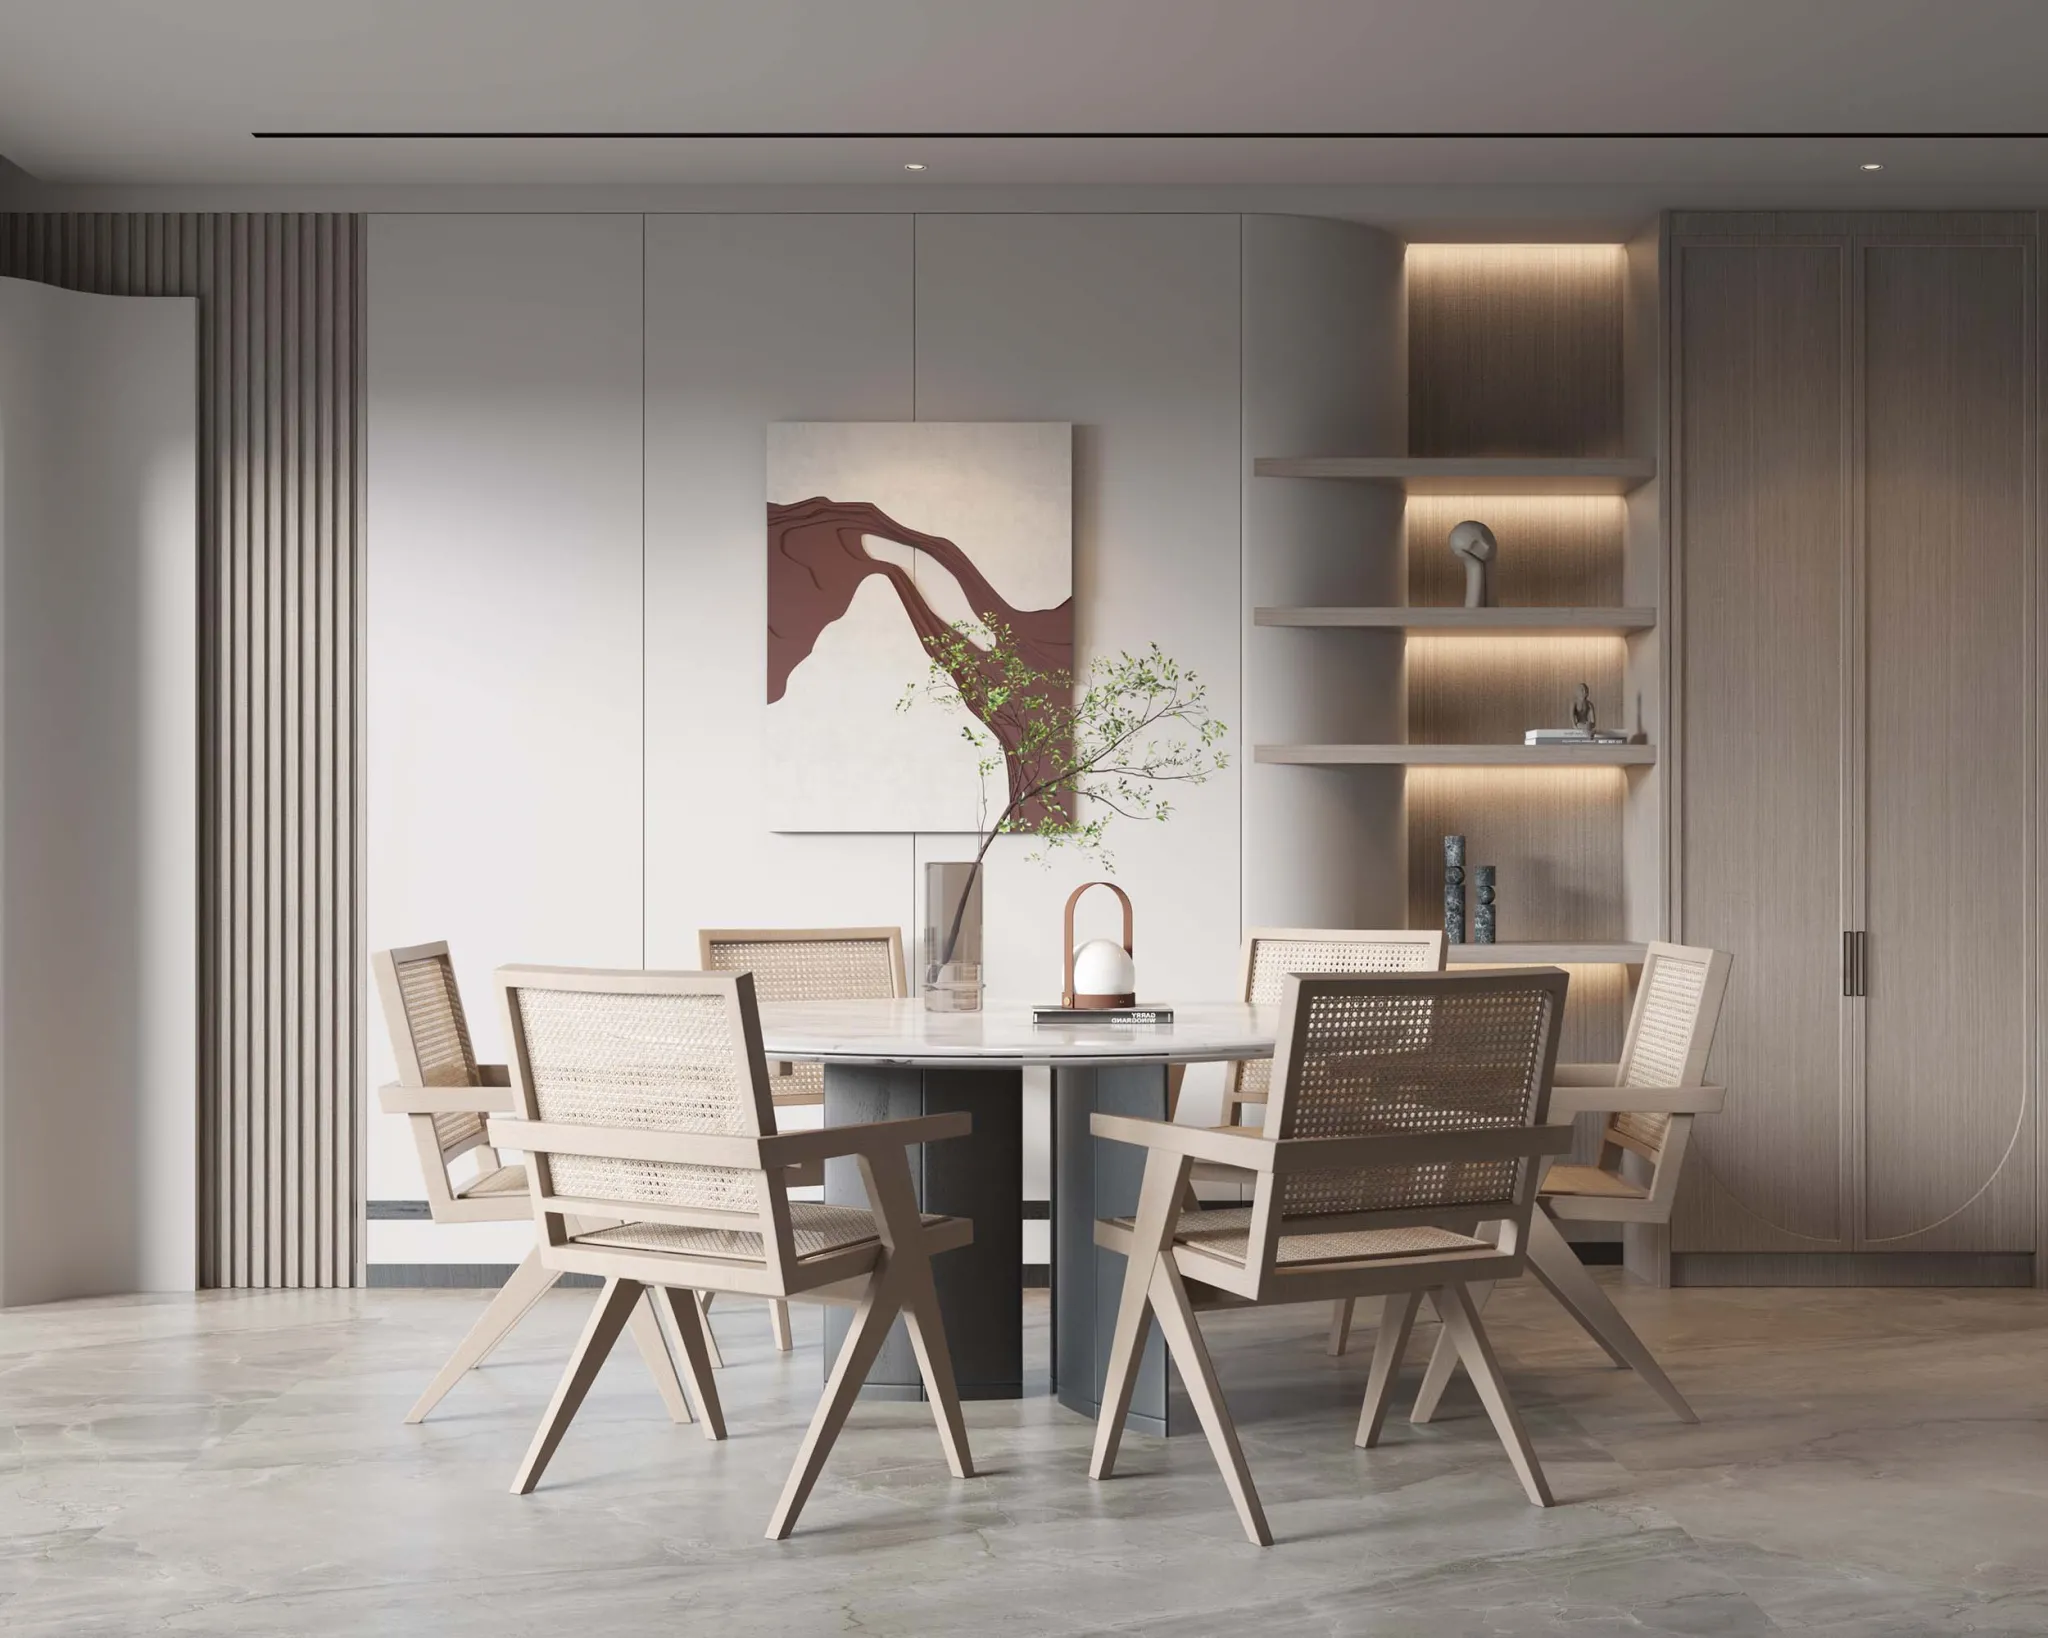 HOUSE SPACE 3D SCENES – DINING ROOM – 0044